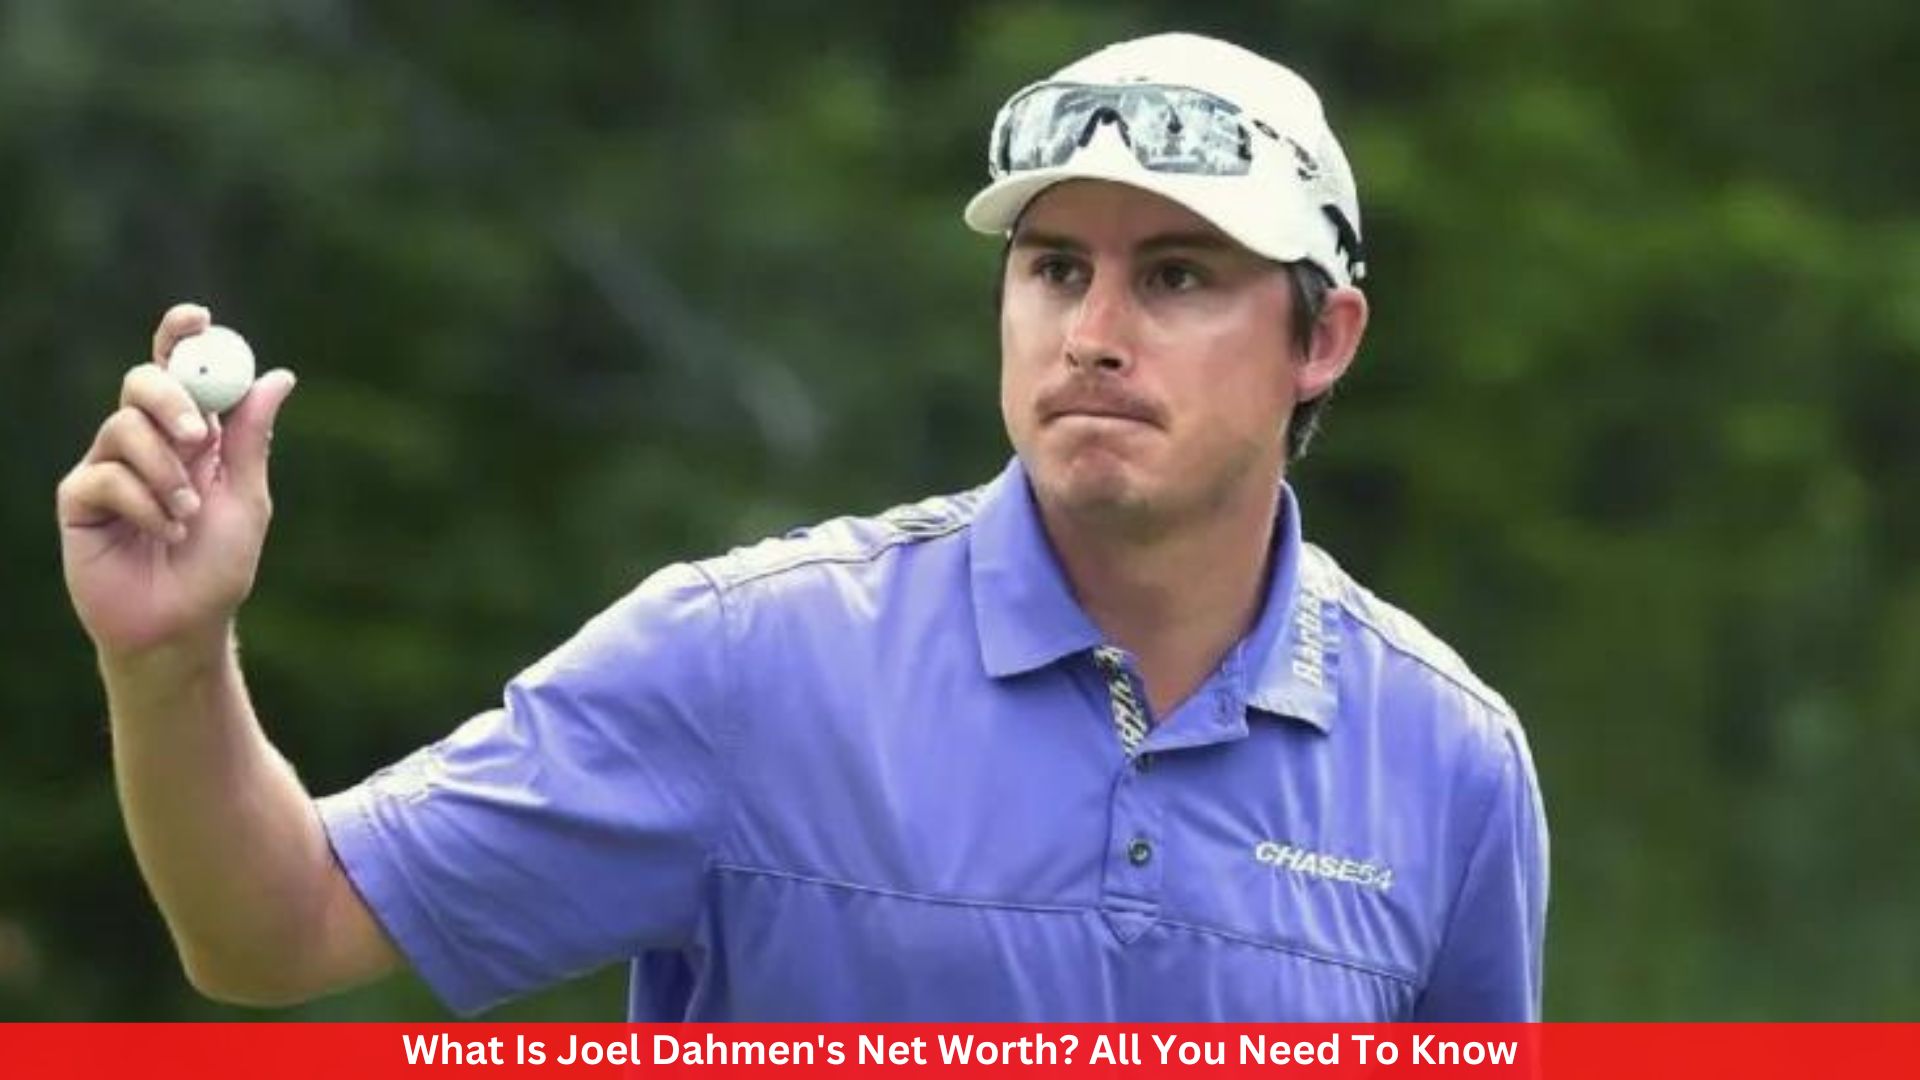 What Is Joel Dahmen's Net Worth? All You Need To Know